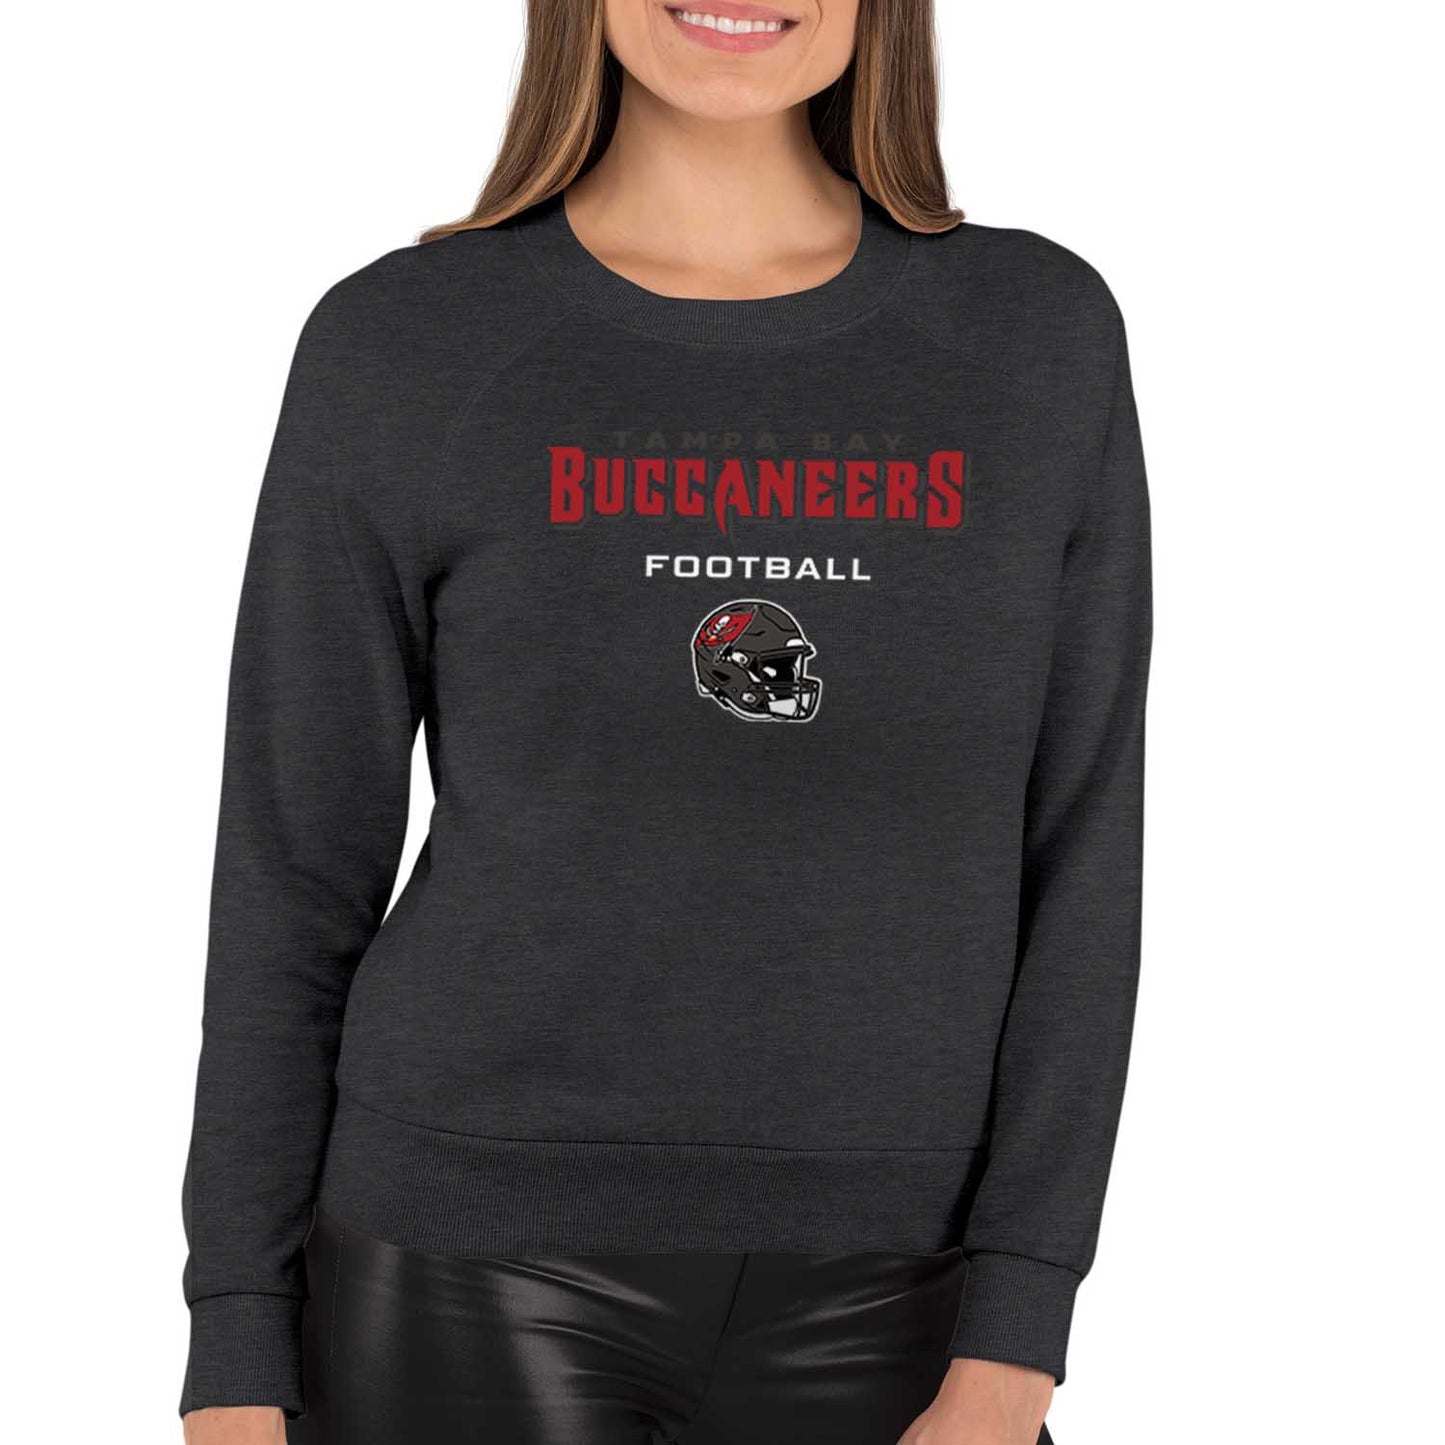 Tampa Bay Buccaneers Women's NFL Football Helmet Charcoal Slouchy Crewneck -Tagless Lightweight Pullover - Charcoal